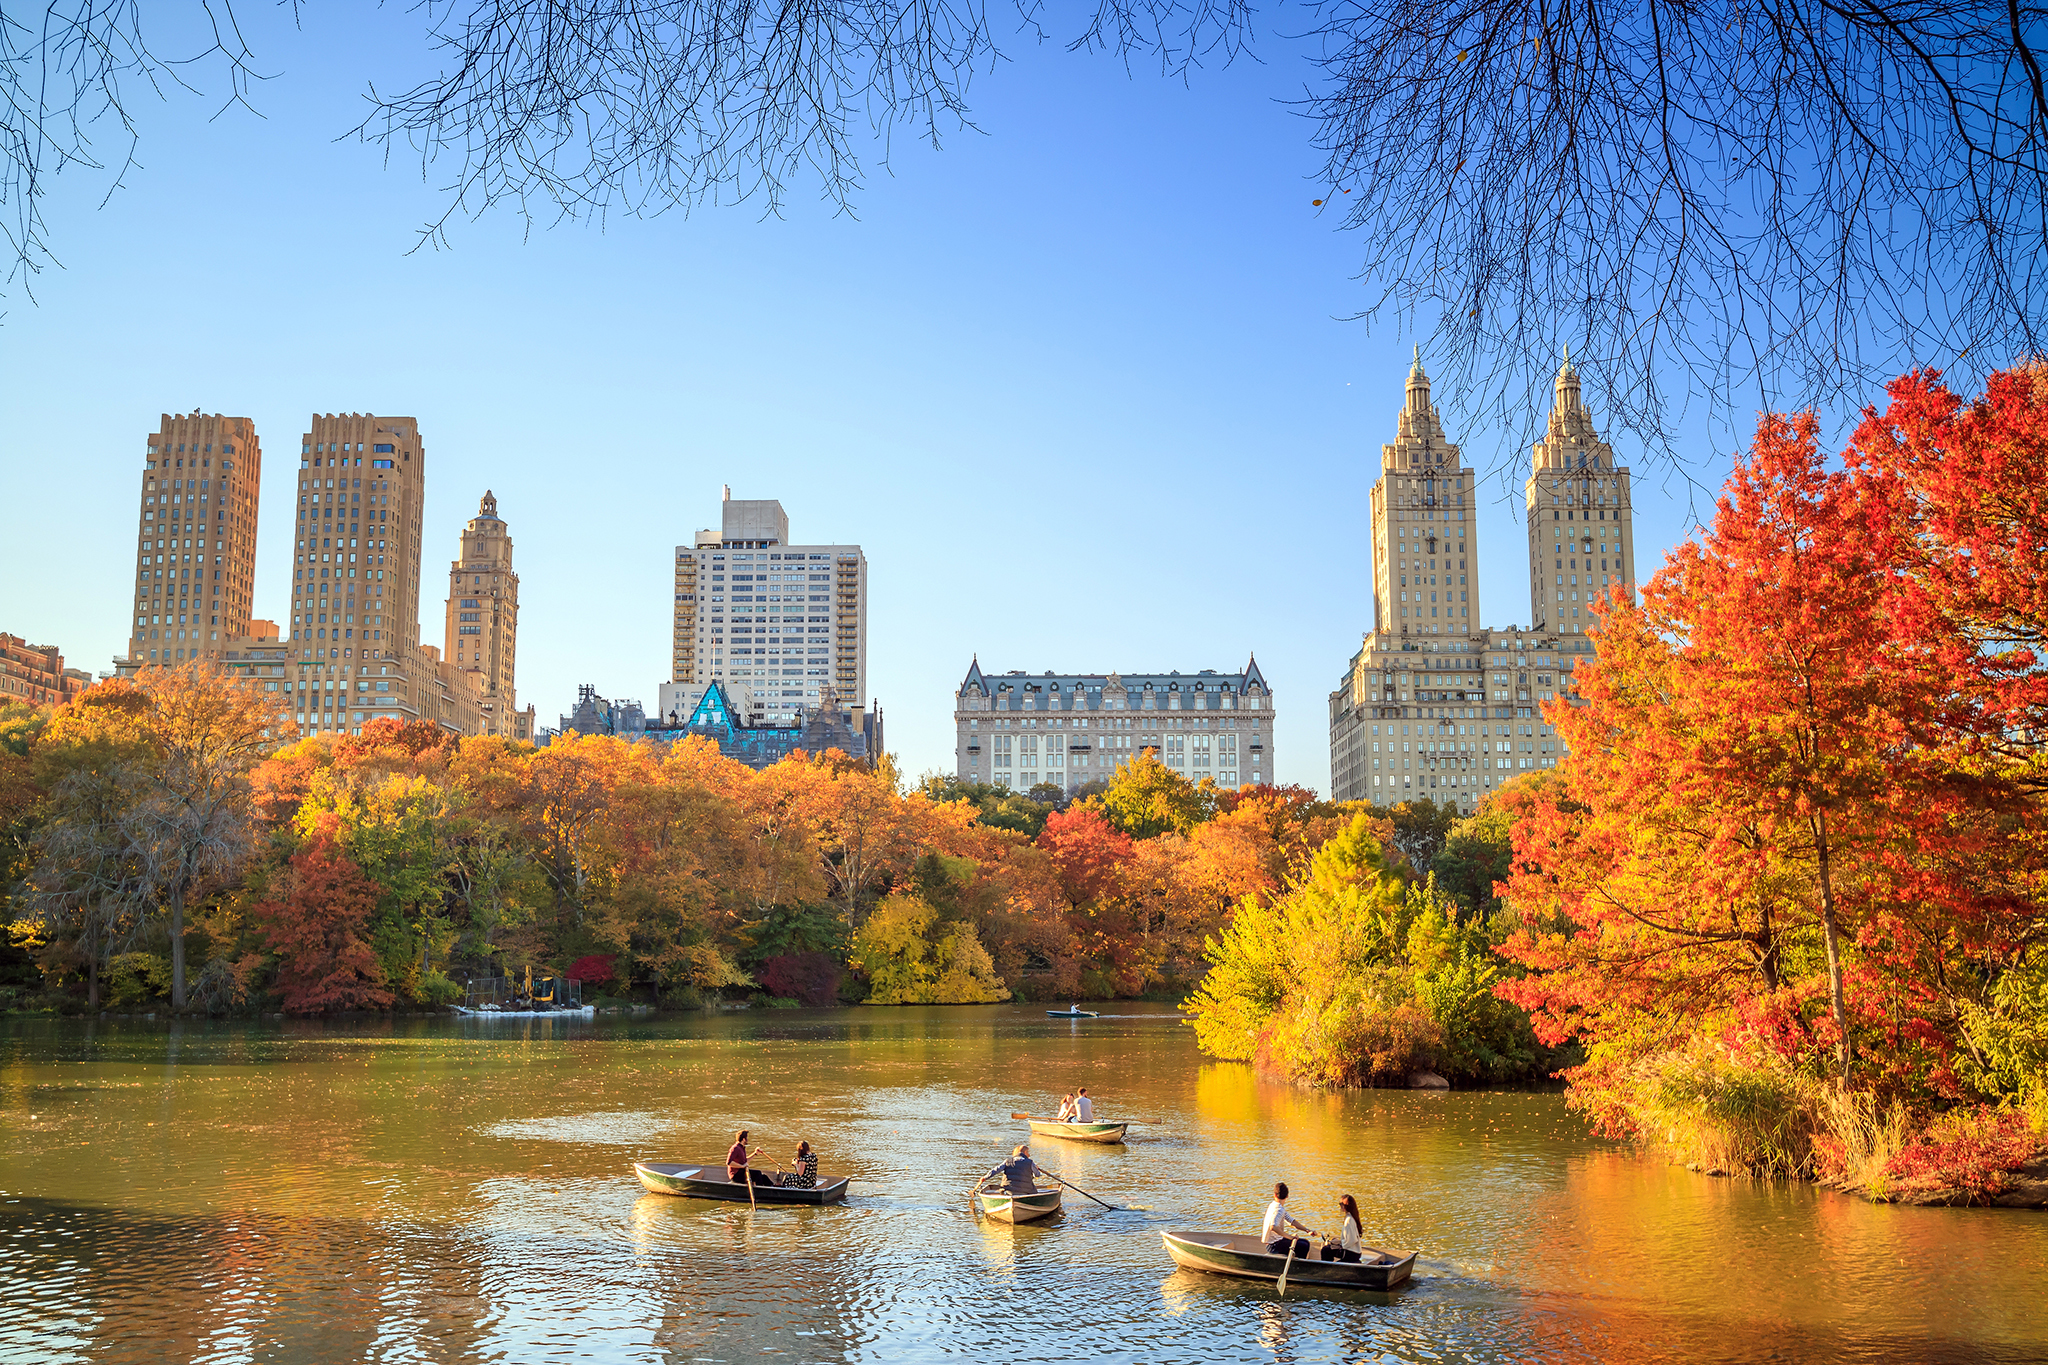 This map shows you the best time to see fall foliage in New York